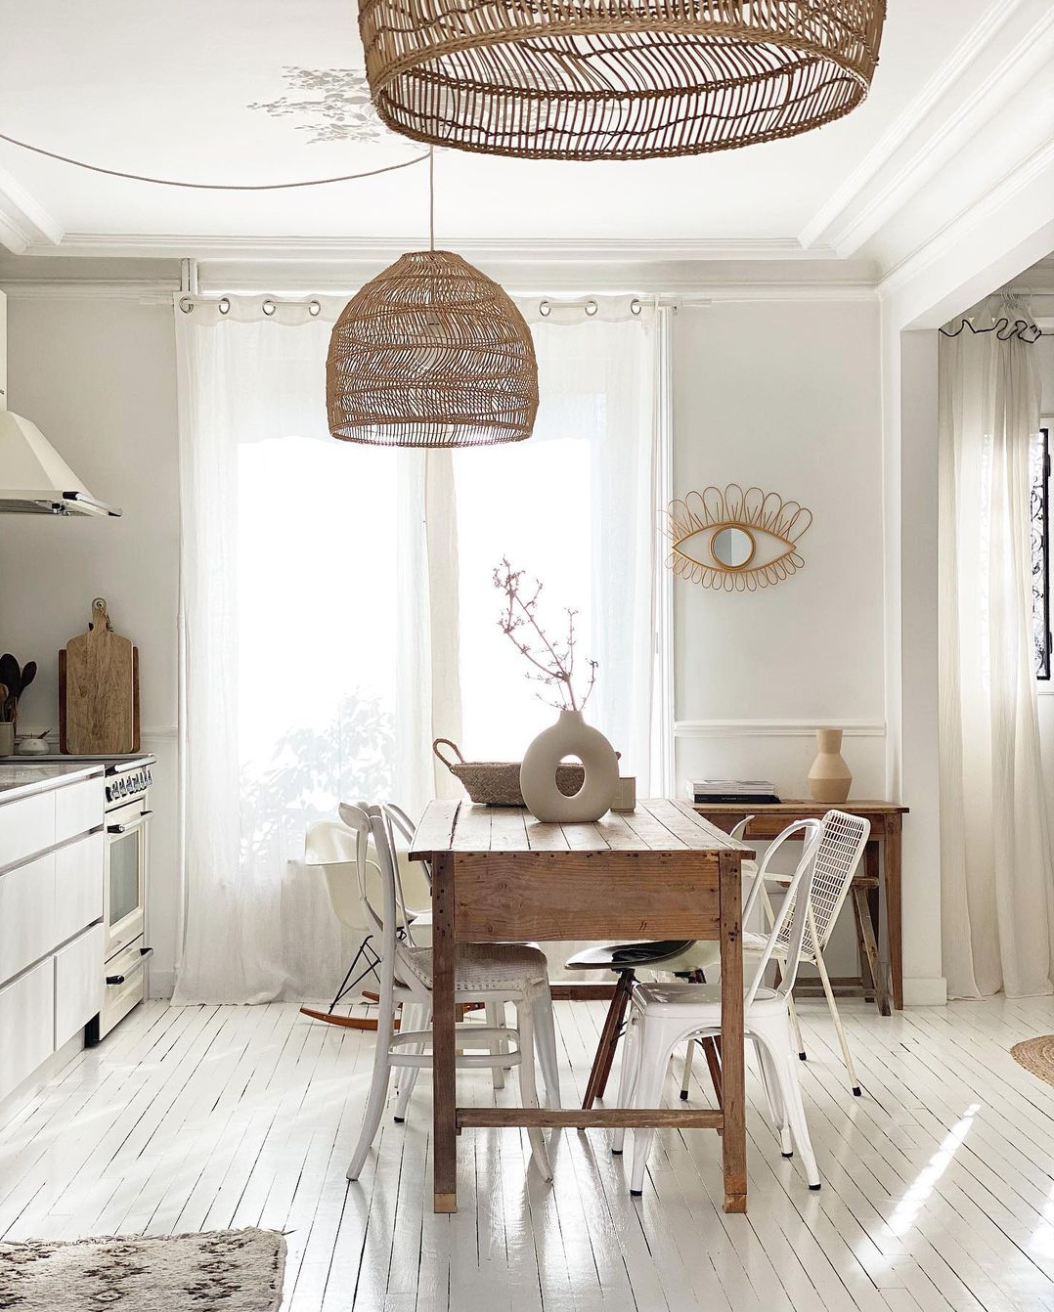 HOME TOUR with Carole Goupil aka @greenpatchouly - featured on 91 Magazine